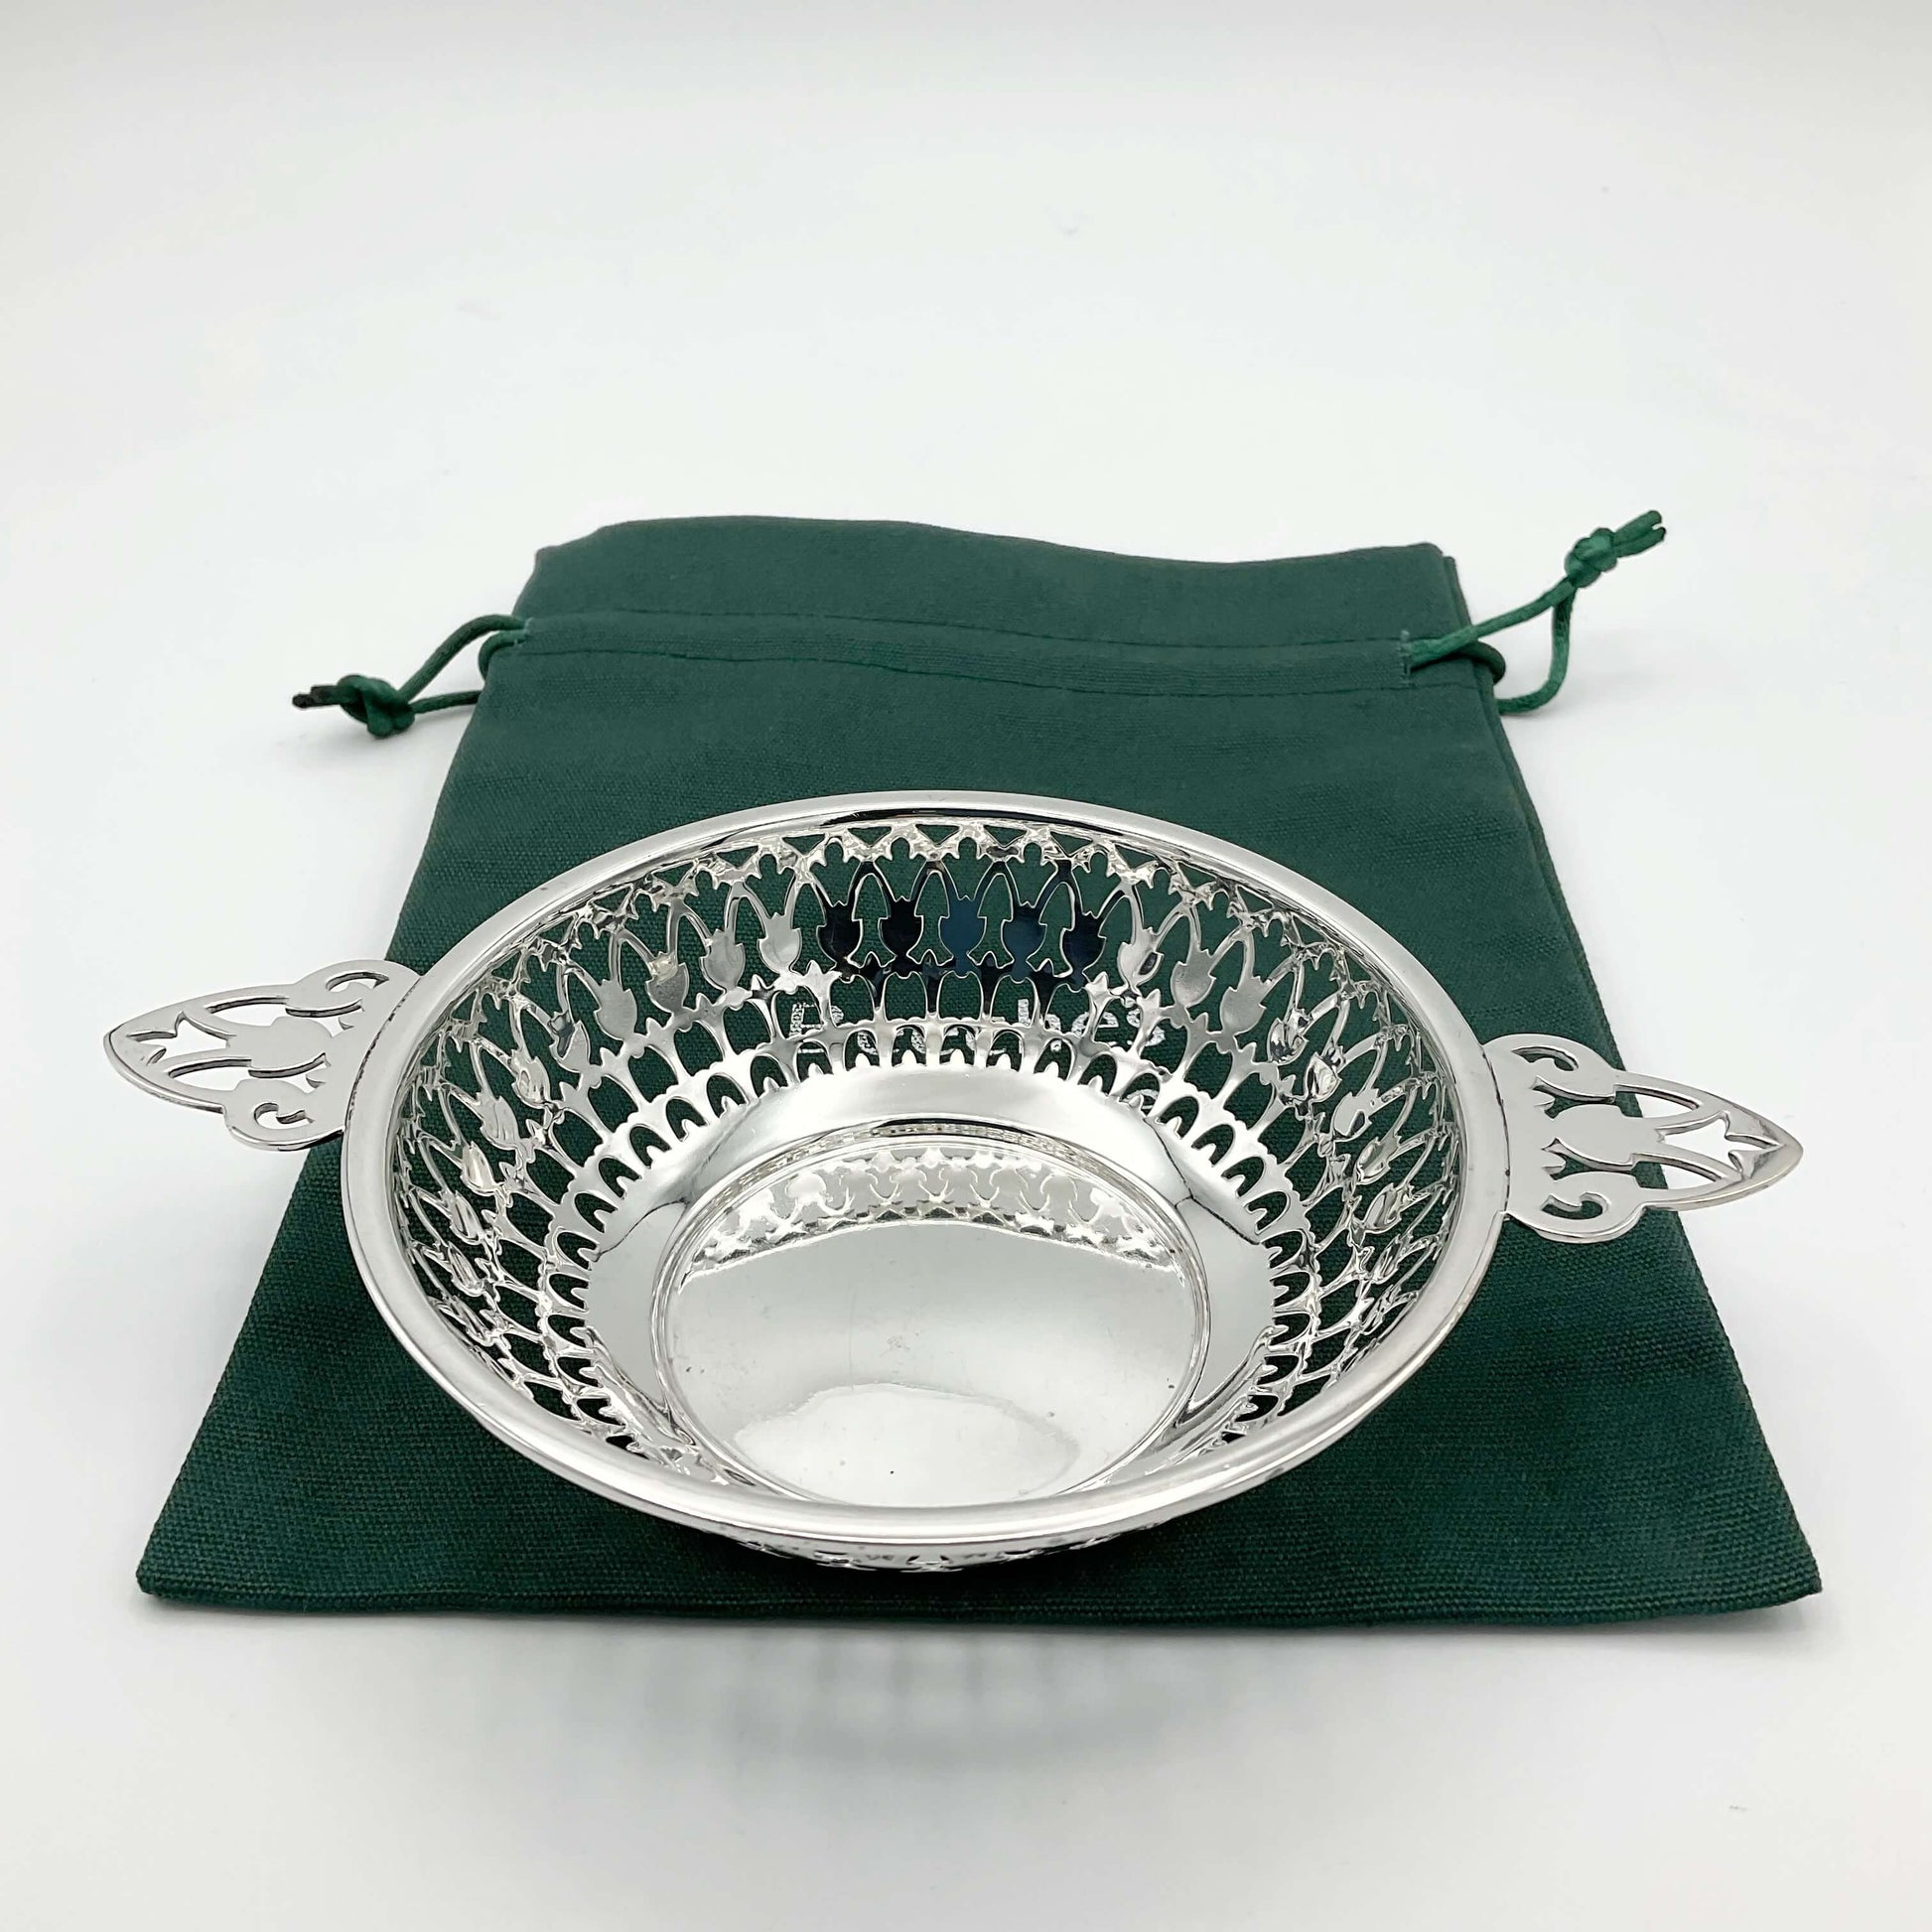 Shiny silver pierced bowl with handles on green cotton gift  bag